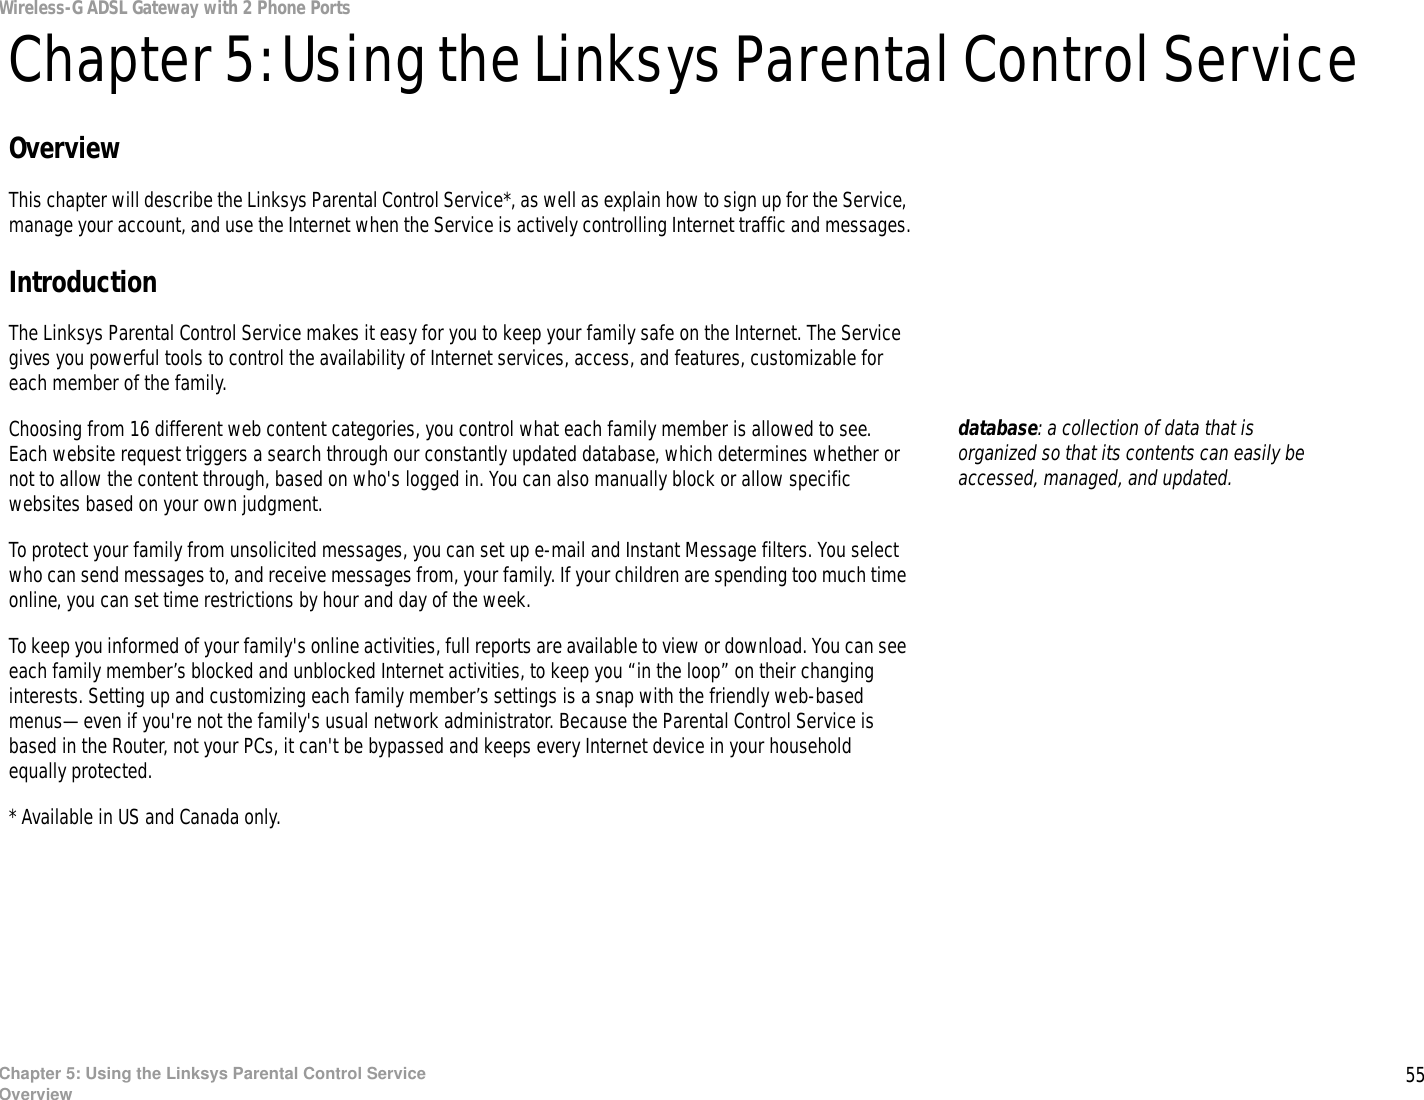 55Chapter 5: Using the Linksys Parental Control ServiceOverviewWireless-G ADSL Gateway with 2 Phone PortsChapter 5: Using the Linksys Parental Control ServiceOverviewThis chapter will describe the Linksys Parental Control Service*, as well as explain how to sign up for the Service, manage your account, and use the Internet when the Service is actively controlling Internet traffic and messages.IntroductionThe Linksys Parental Control Service makes it easy for you to keep your family safe on the Internet. The Service gives you powerful tools to control the availability of Internet services, access, and features, customizable for each member of the family.Choosing from 16 different web content categories, you control what each family member is allowed to see.  Each website request triggers a search through our constantly updated database, which determines whether or not to allow the content through, based on who&apos;s logged in. You can also manually block or allow specific websites based on your own judgment.To protect your family from unsolicited messages, you can set up e-mail and Instant Message filters. You select who can send messages to, and receive messages from, your family. If your children are spending too much time online, you can set time restrictions by hour and day of the week.To keep you informed of your family&apos;s online activities, full reports are available to view or download. You can see each family member’s blocked and unblocked Internet activities, to keep you “in the loop” on their changing interests. Setting up and customizing each family member’s settings is a snap with the friendly web-based menus—even if you&apos;re not the family&apos;s usual network administrator. Because the Parental Control Service is based in the Router, not your PCs, it can&apos;t be bypassed and keeps every Internet device in your household equally protected.* Available in US and Canada only. database: a collection of data that is organized so that its contents can easily be accessed, managed, and updated.